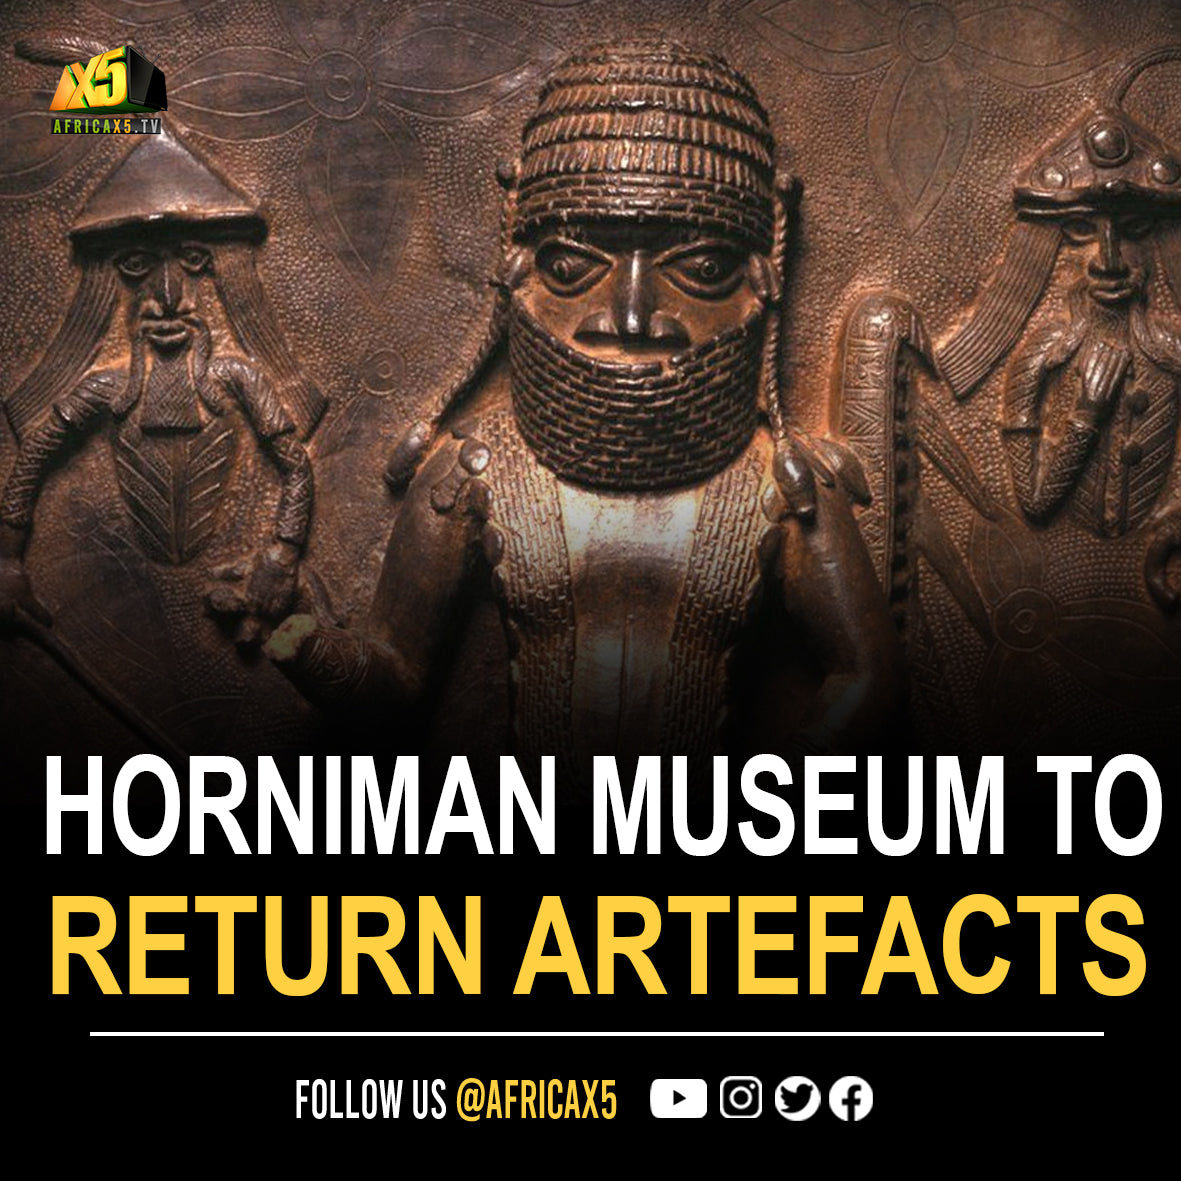 The London ‘Horniman Museum’ have agreed to return stolen artefacts from the 19th century from the kingdom of Benin to the Nigerian government. ⠀